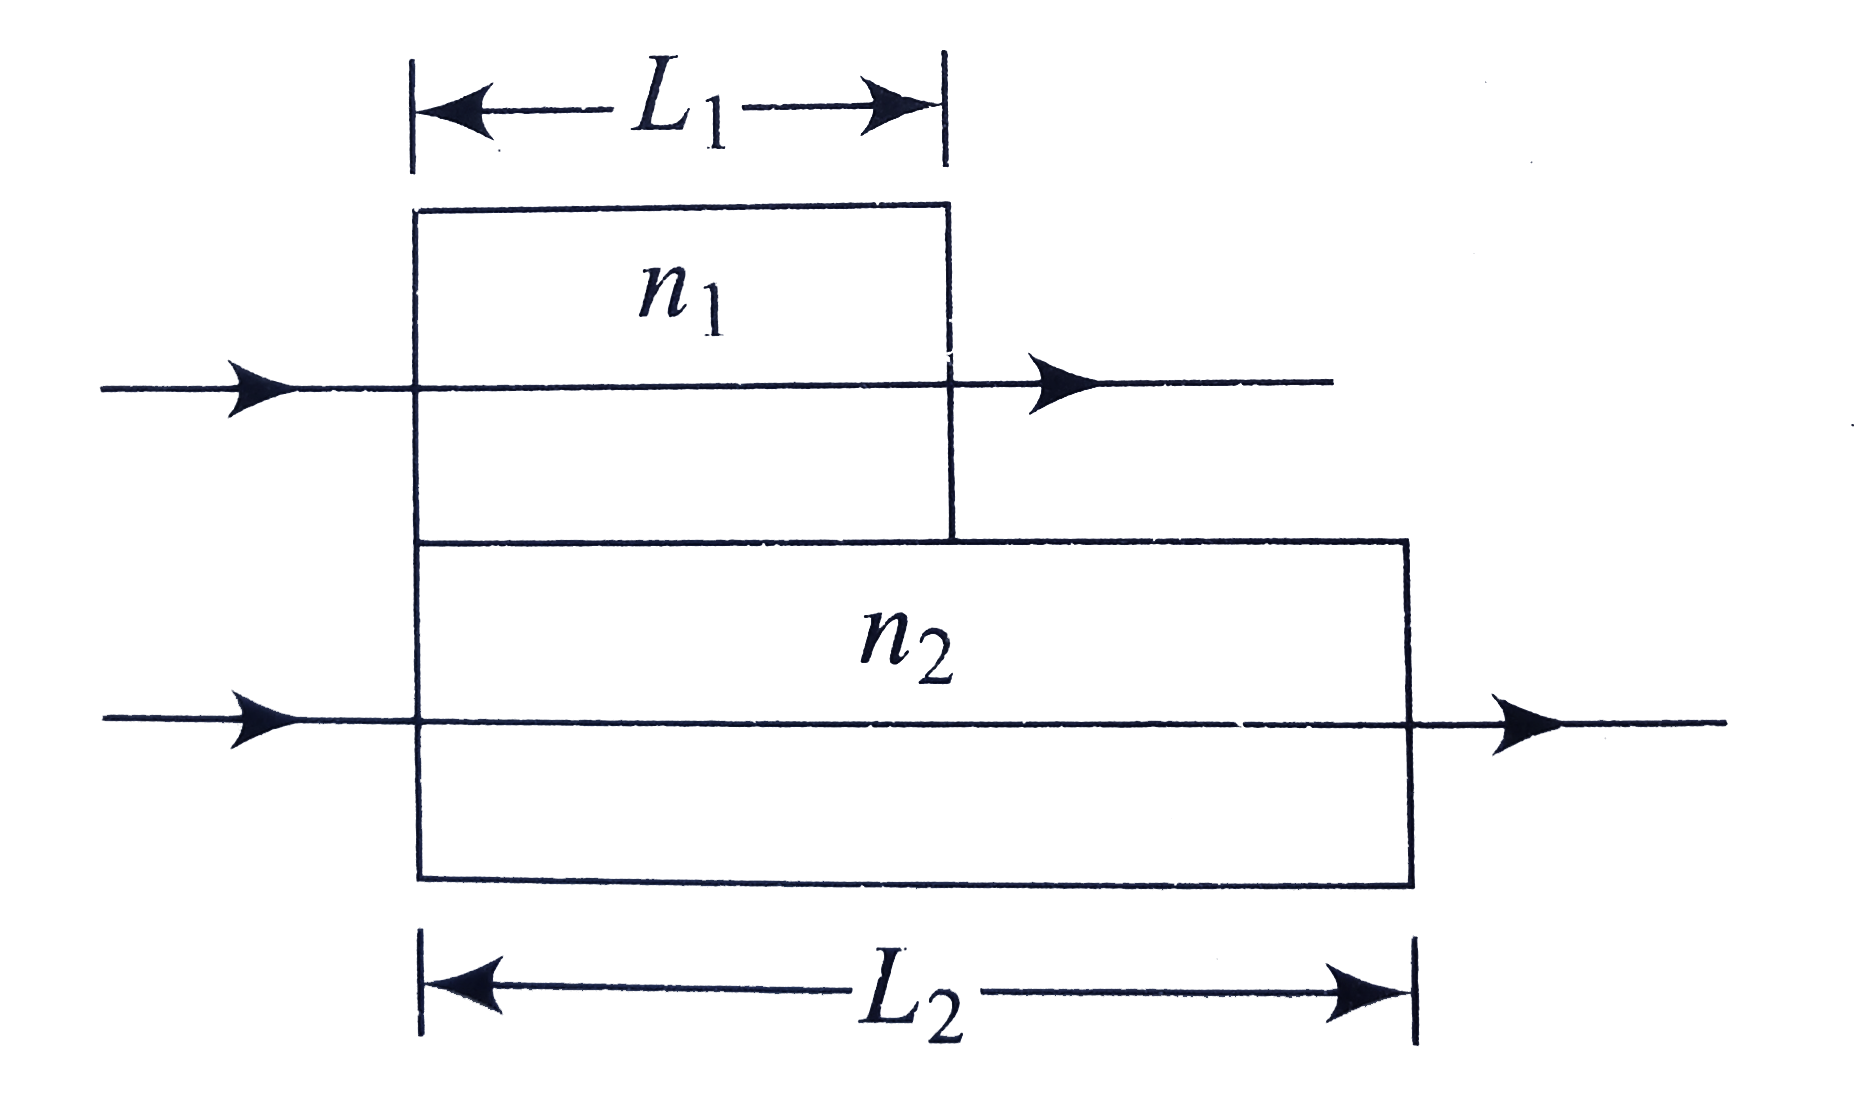 Two waves of light in air have the same wavelength and are intially in phase. They then travel through plastic layers with thickness of L(1) = 3.5 mm and L(2) = 5.0 mm and indices of refraction n(1) = 1.7 and n(2) = 1.25 as shown in figure. The rays later arrive at a common point. The longest wavelength of light for which constructive interference occurs at the point is